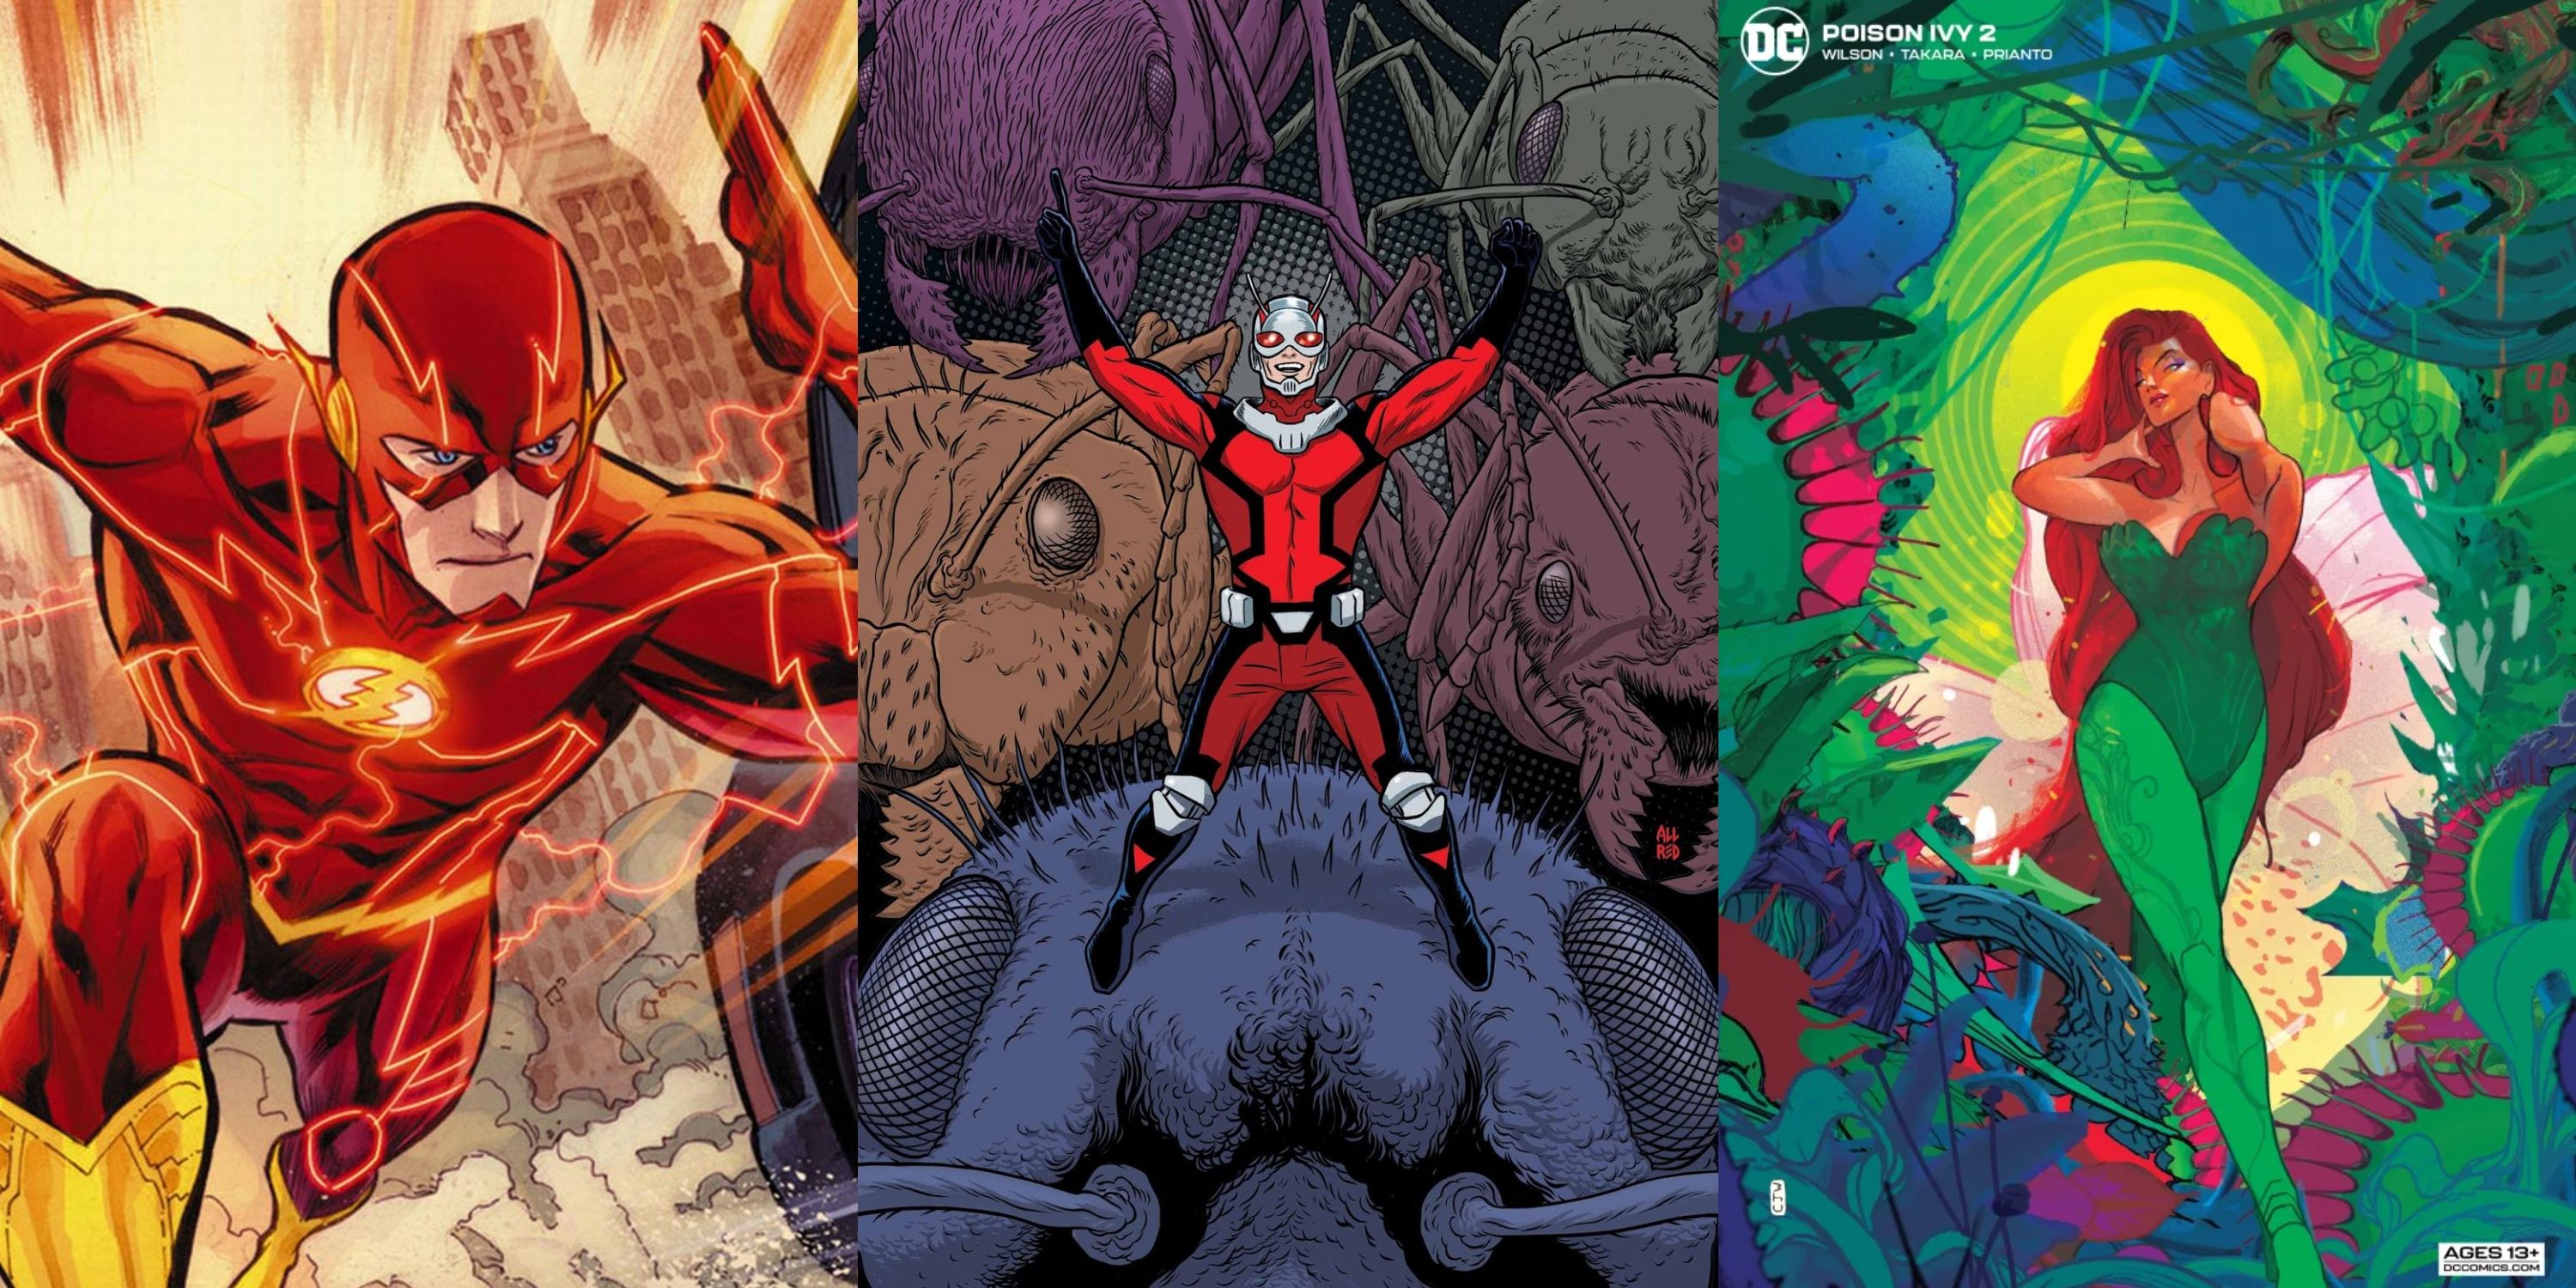 Split image: the Flash runs, Ant-Man commands ants, and Poison Ivy in DC and Marvel comics